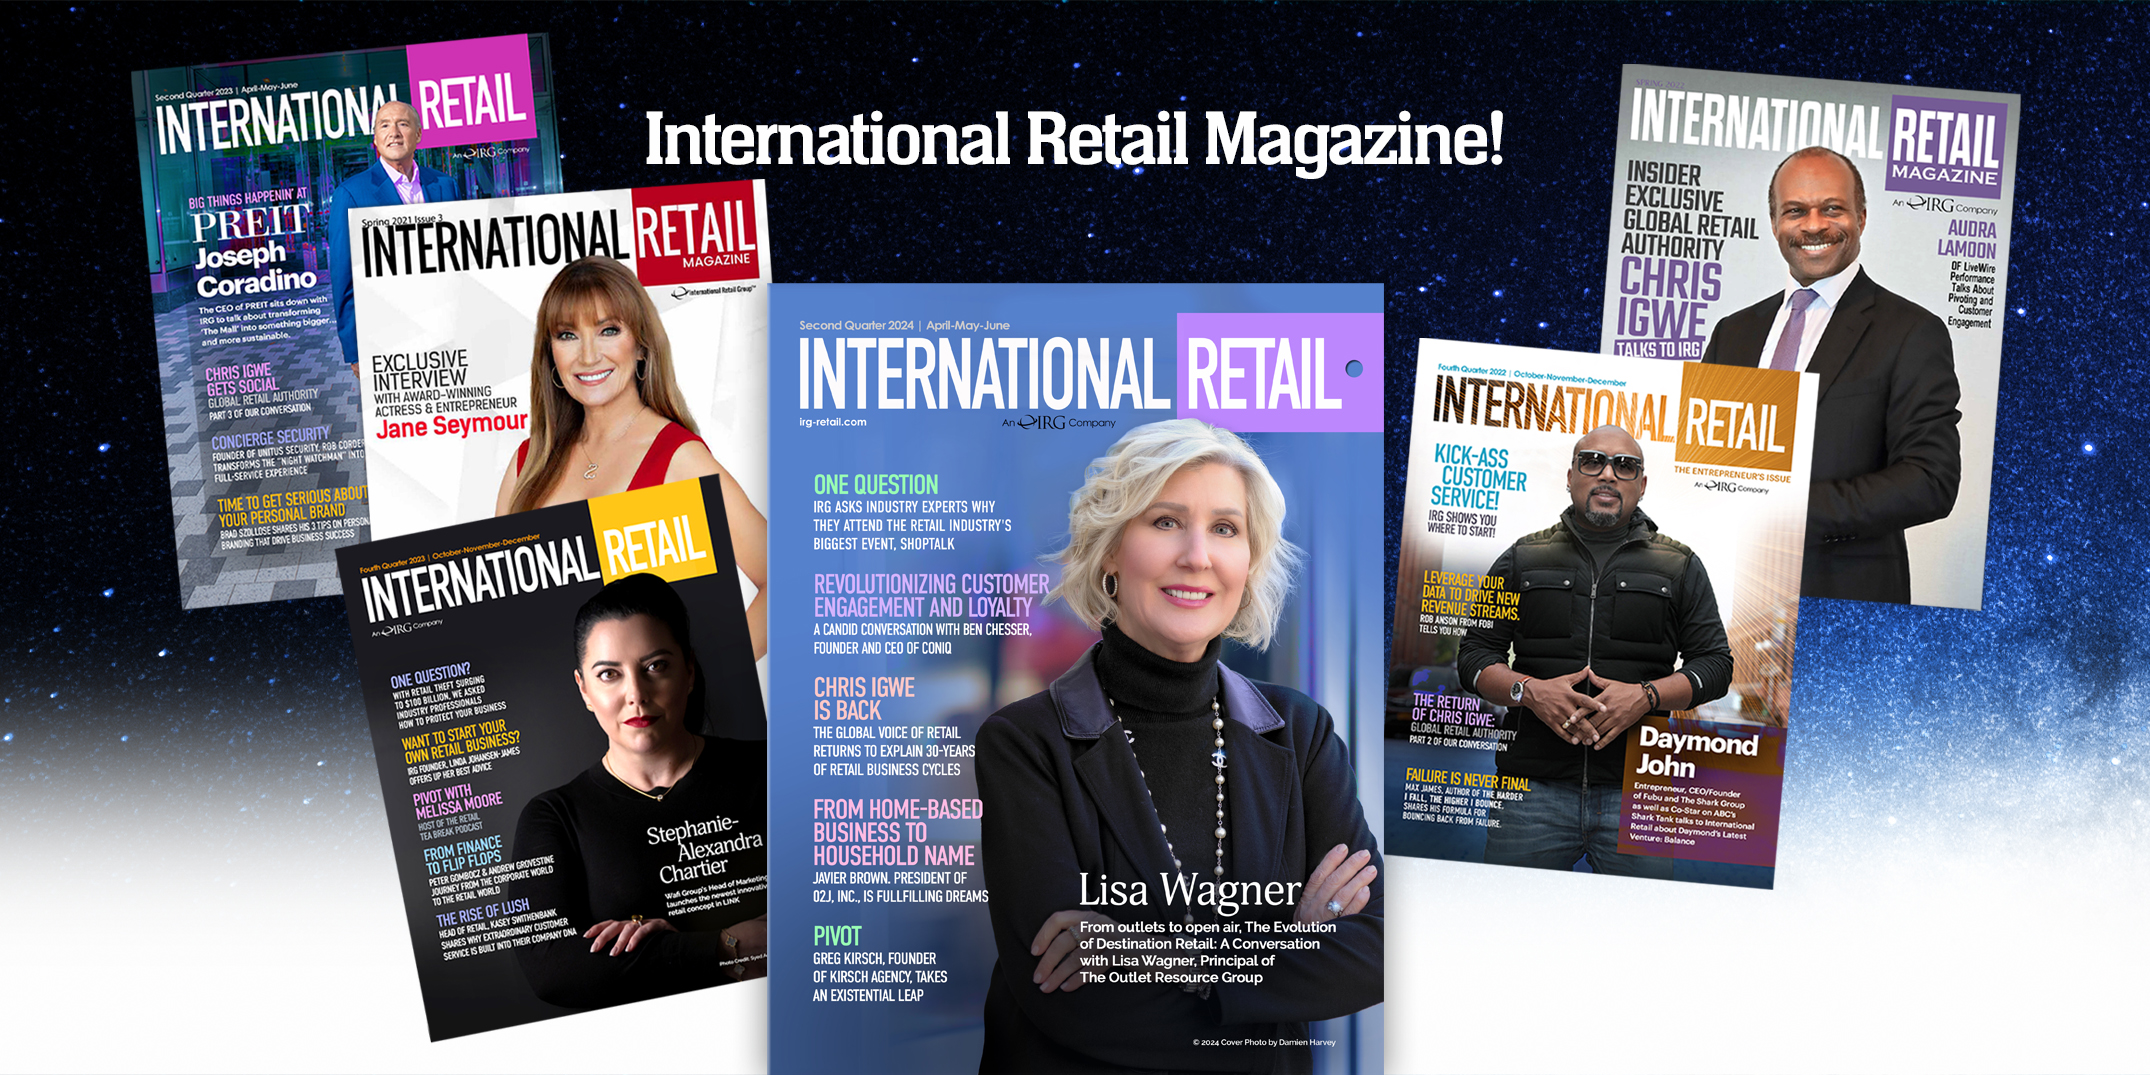 Welcome to International Retail Magazine: The Insider Guide for The Retail Professional